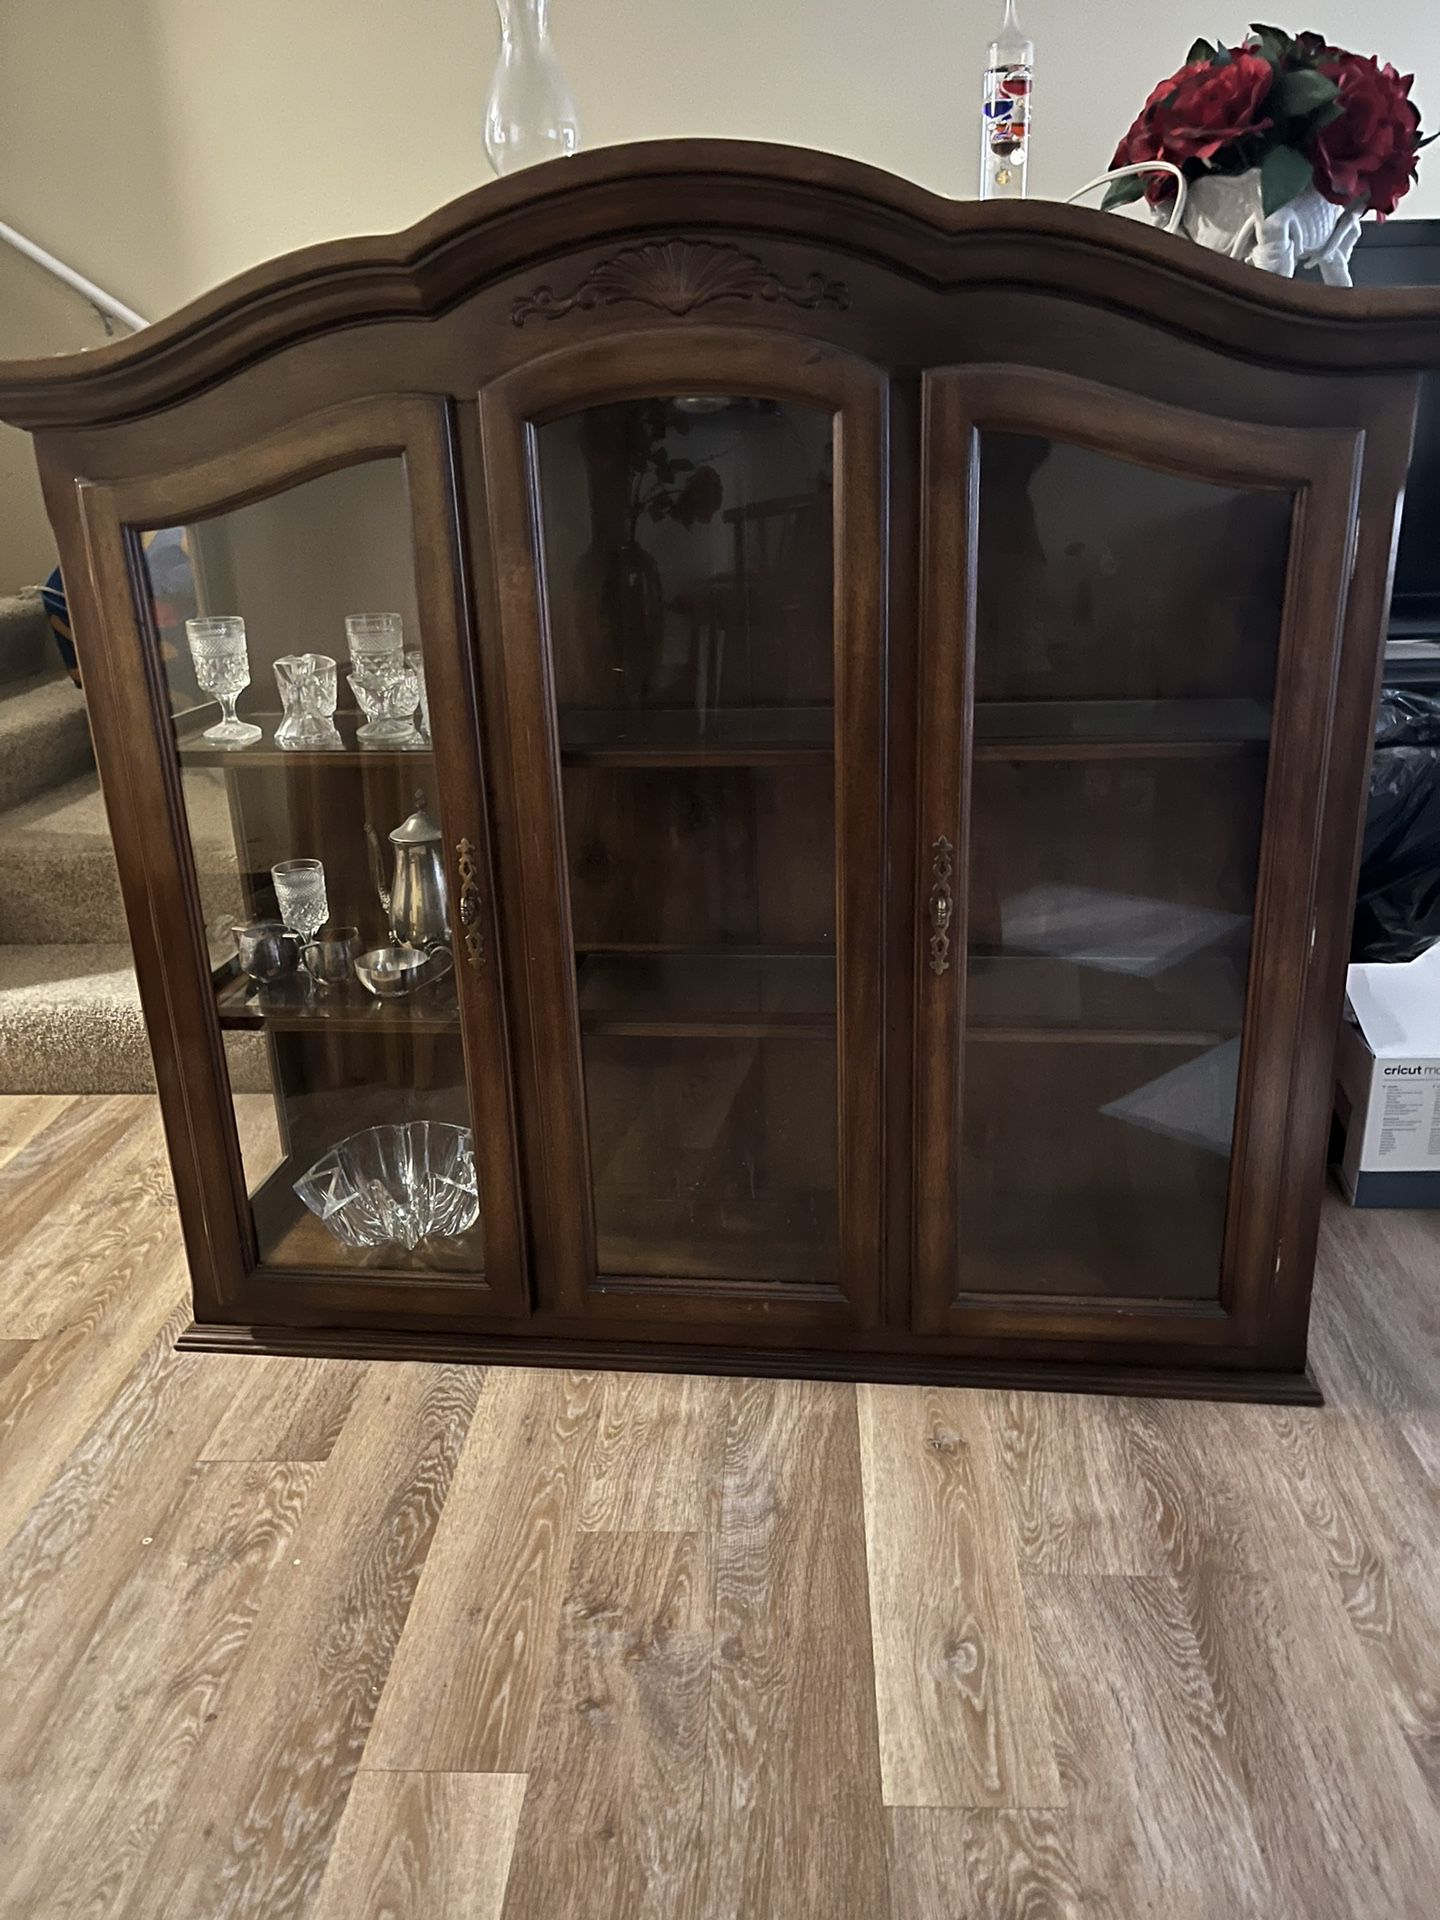 “Antique” Hutch with Glass Shelves and Lighting